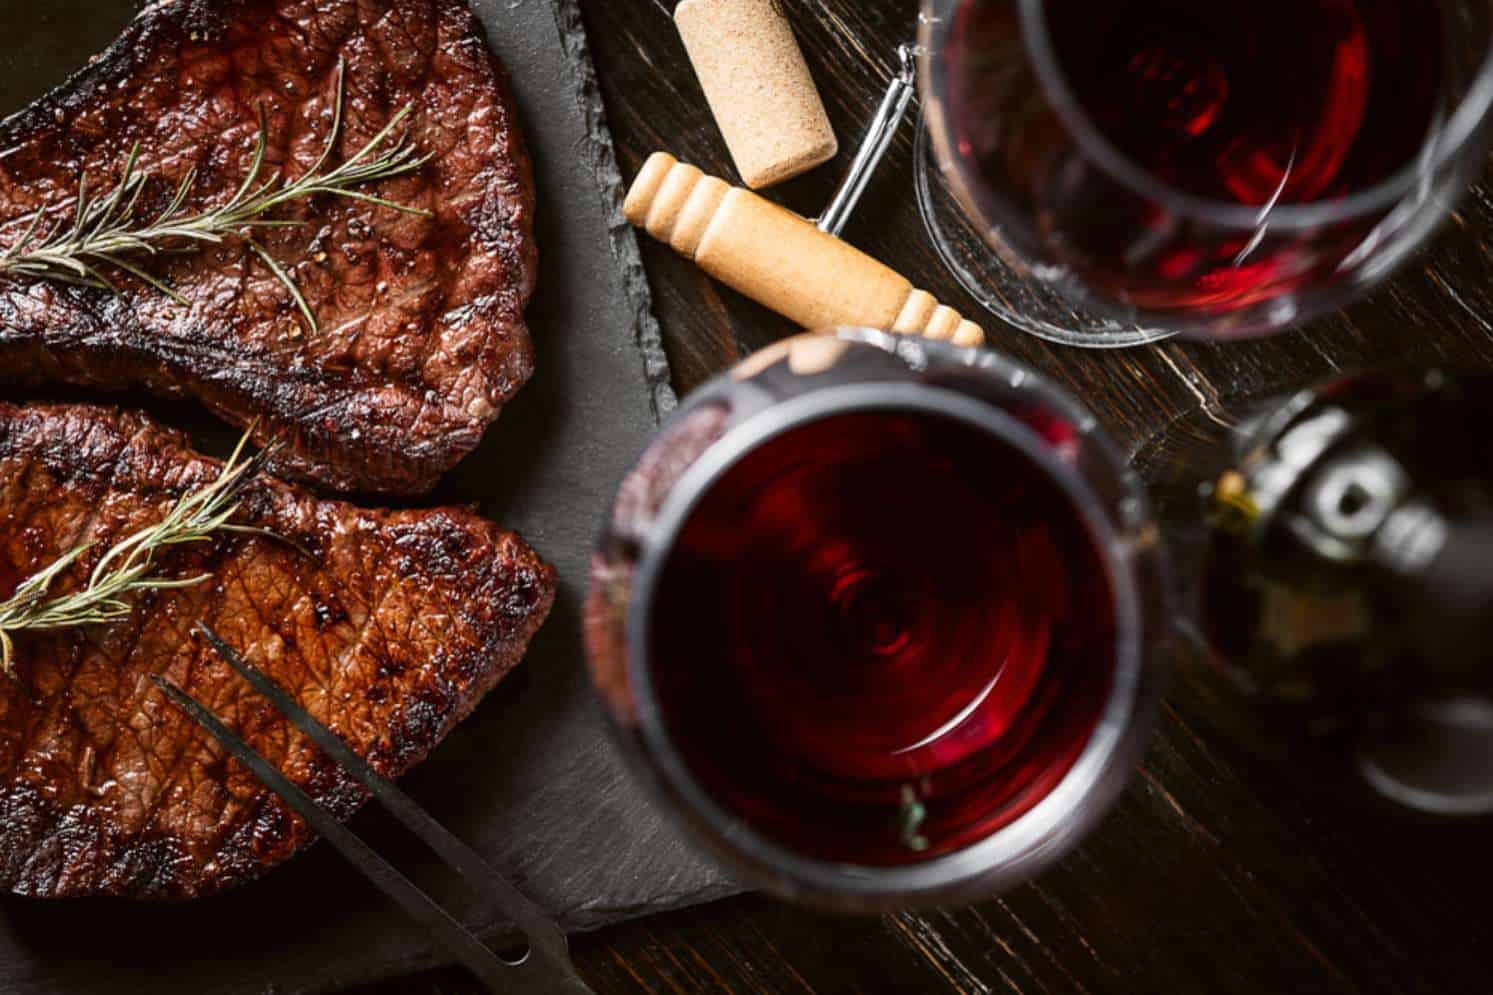 Why is Wine Served with Steak